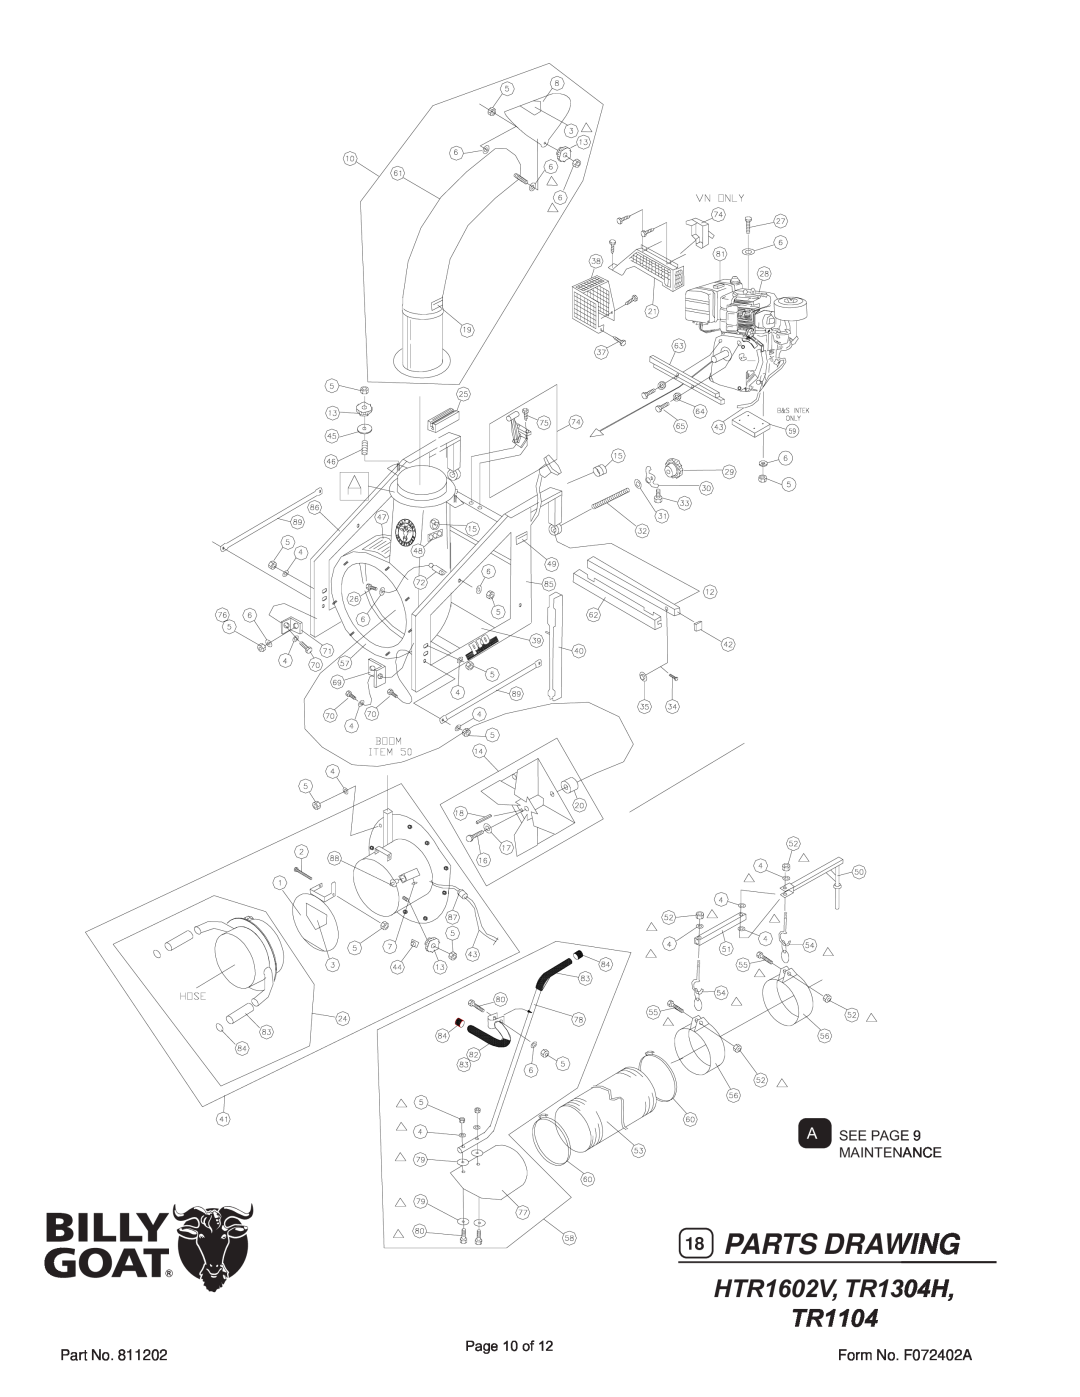 Billy Goat specifications Parts Drawing, HTR1602V, TR1304H TR1104 